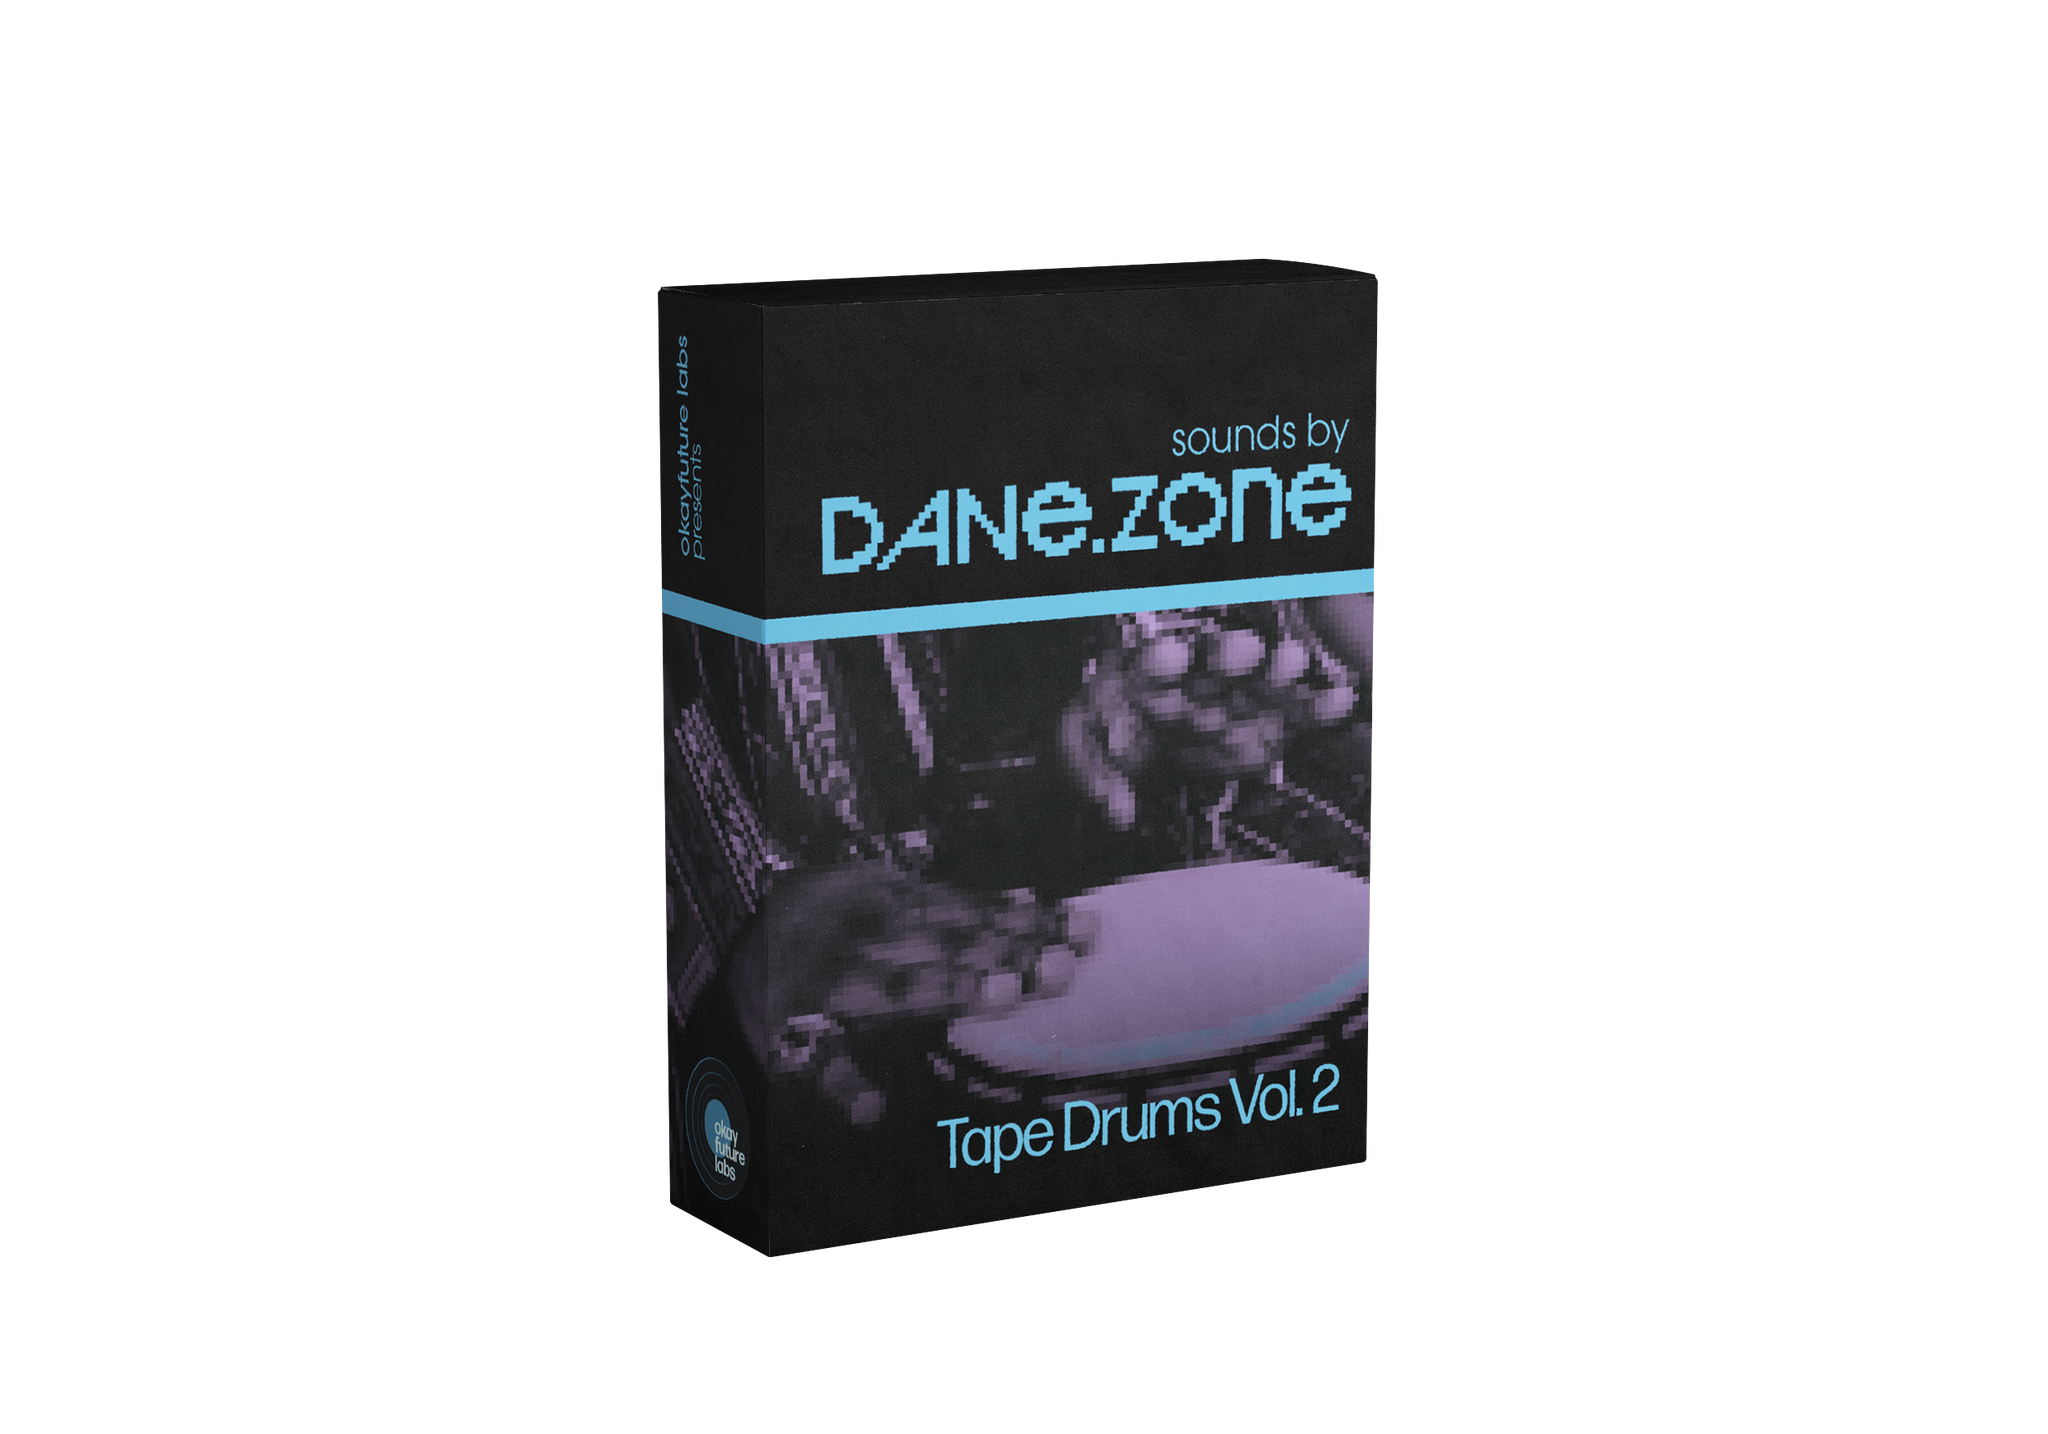 Sounds by Dane.Zone: Tape Drums Vol. 2